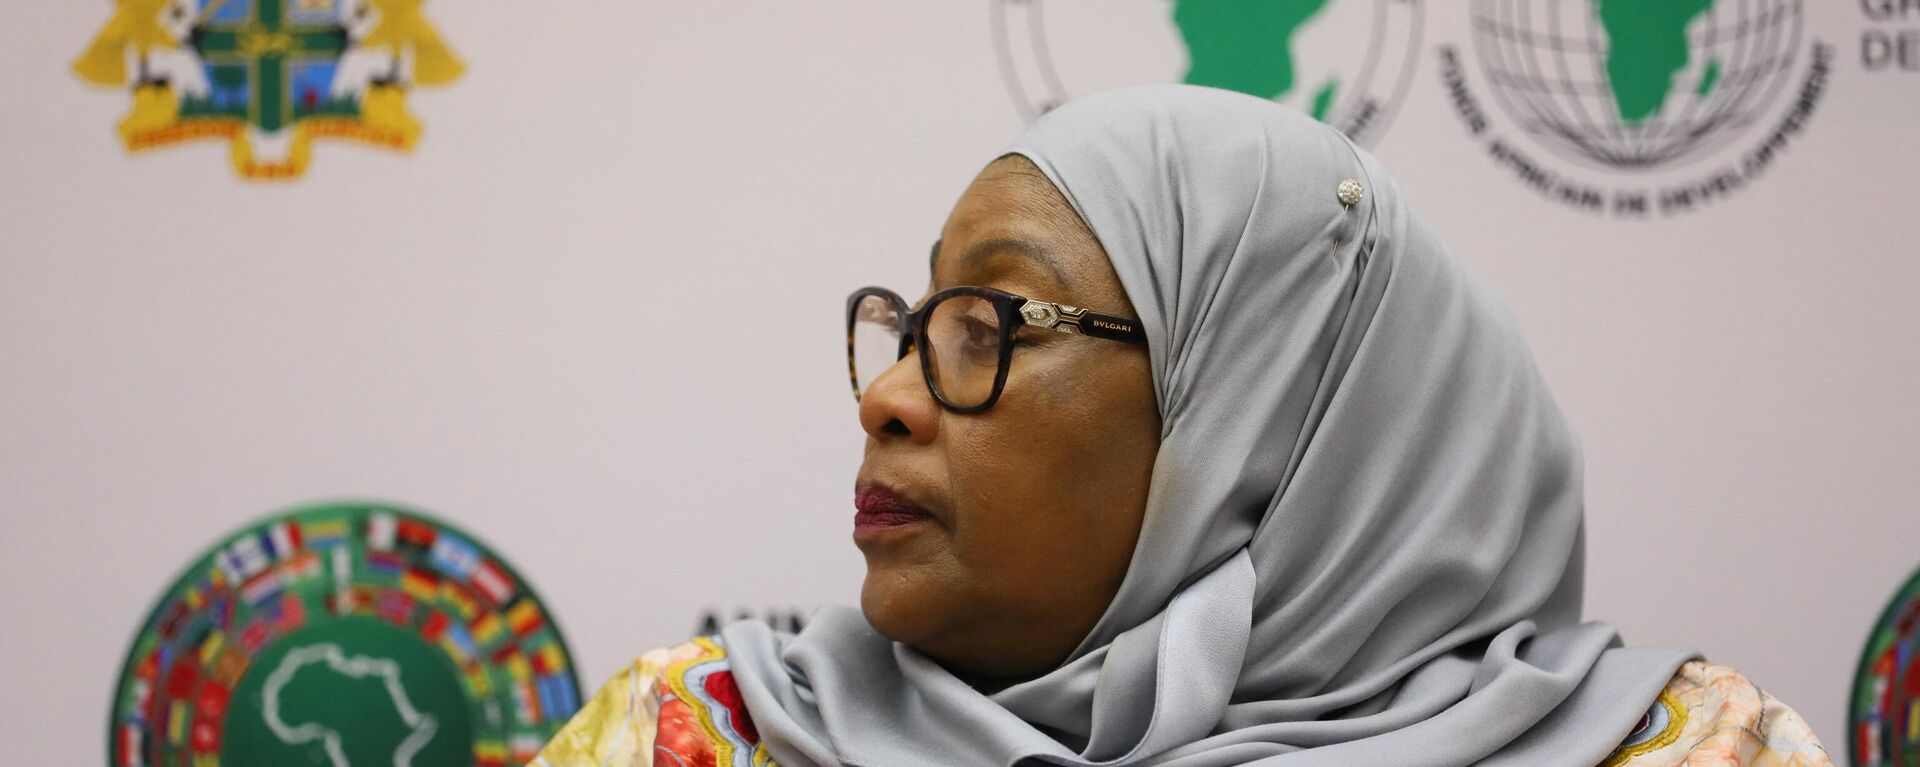 Tanzania President Samia Suluhu Hassan looks on while taking part in the African Development Bank Group Annual Meeting in Accra, Ghana, on May 25, 2022. - Sputnik International, 1920, 24.12.2022